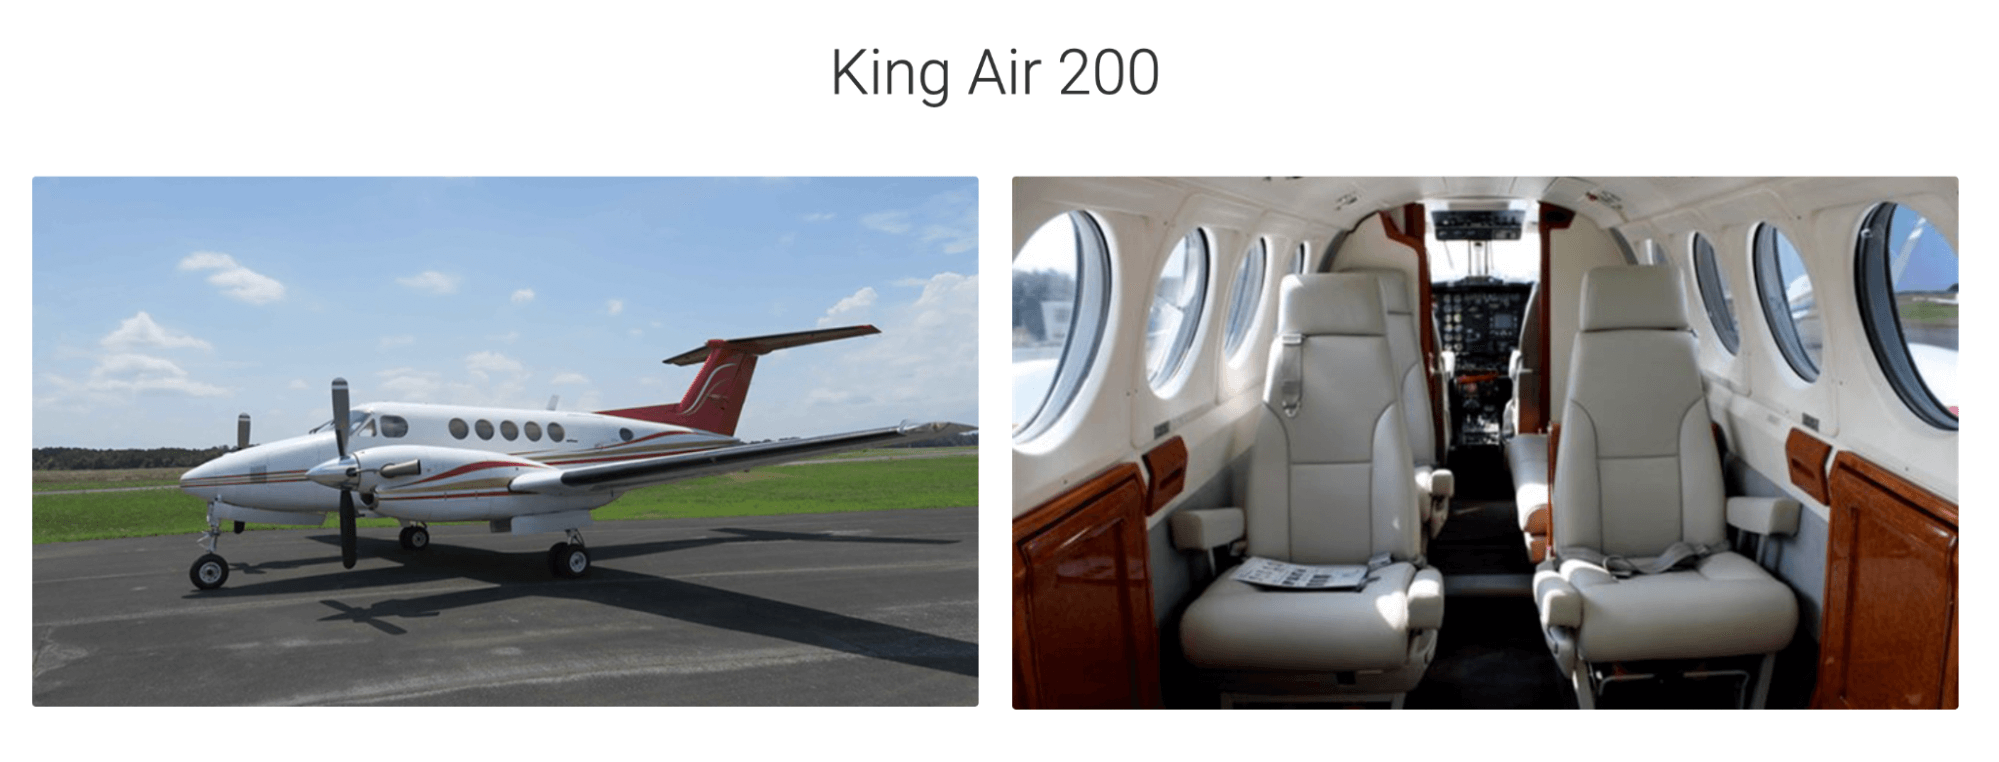 An exterior and interior picture of the turboprop jet King Air 200.